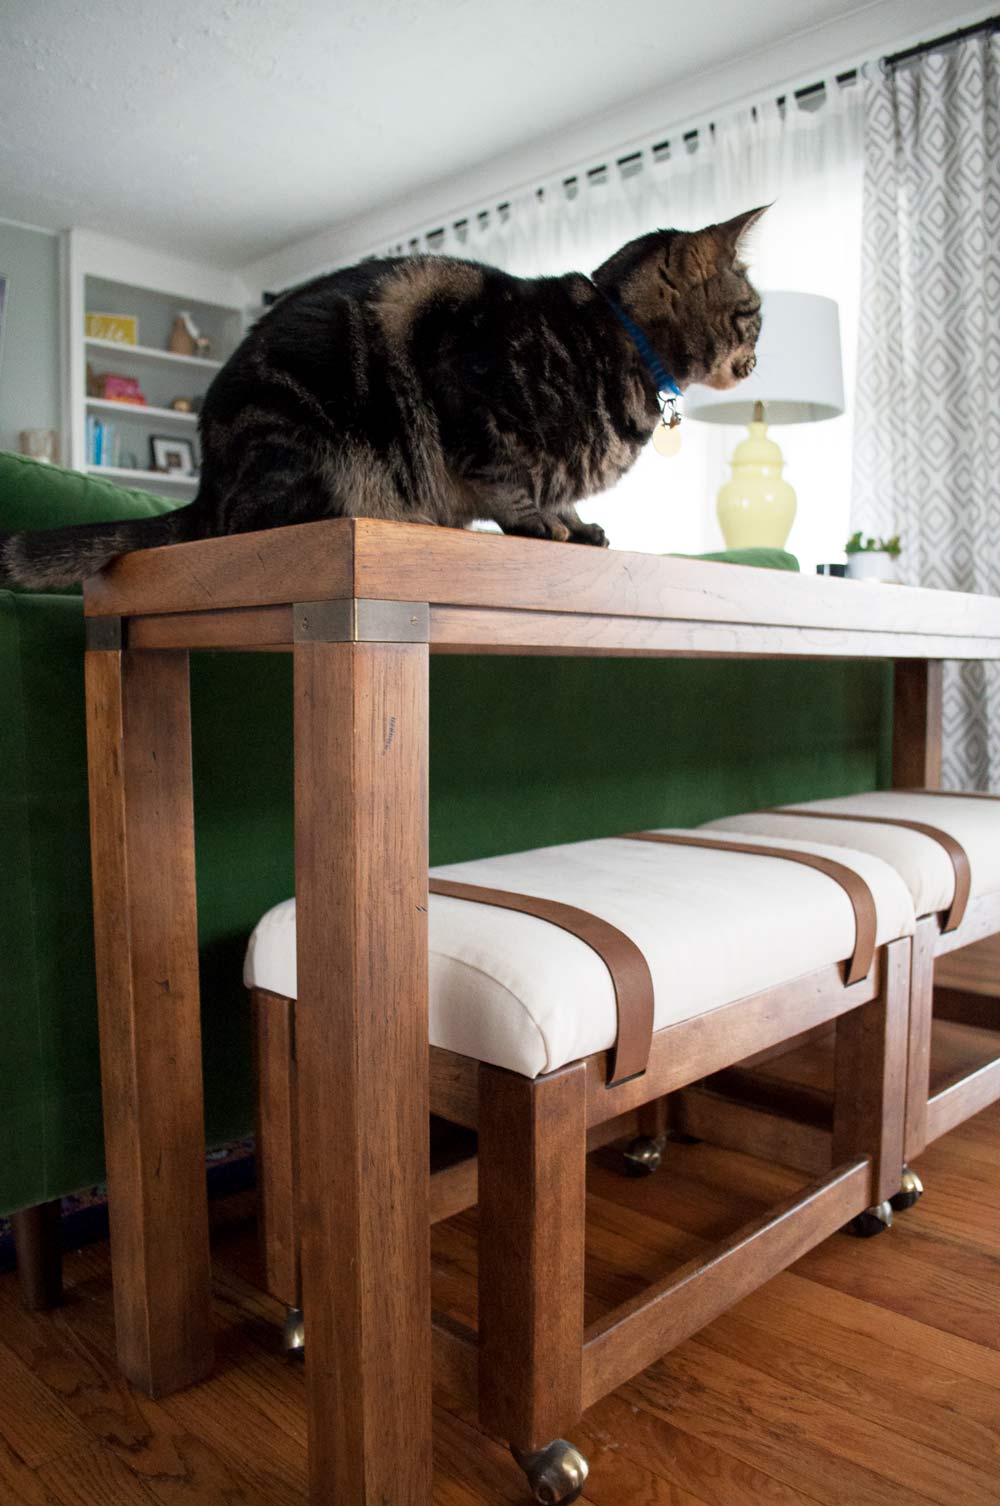 Learn how to upgrade any benches with this DIY Leather Strap Bench tutorial on And Then We Tried